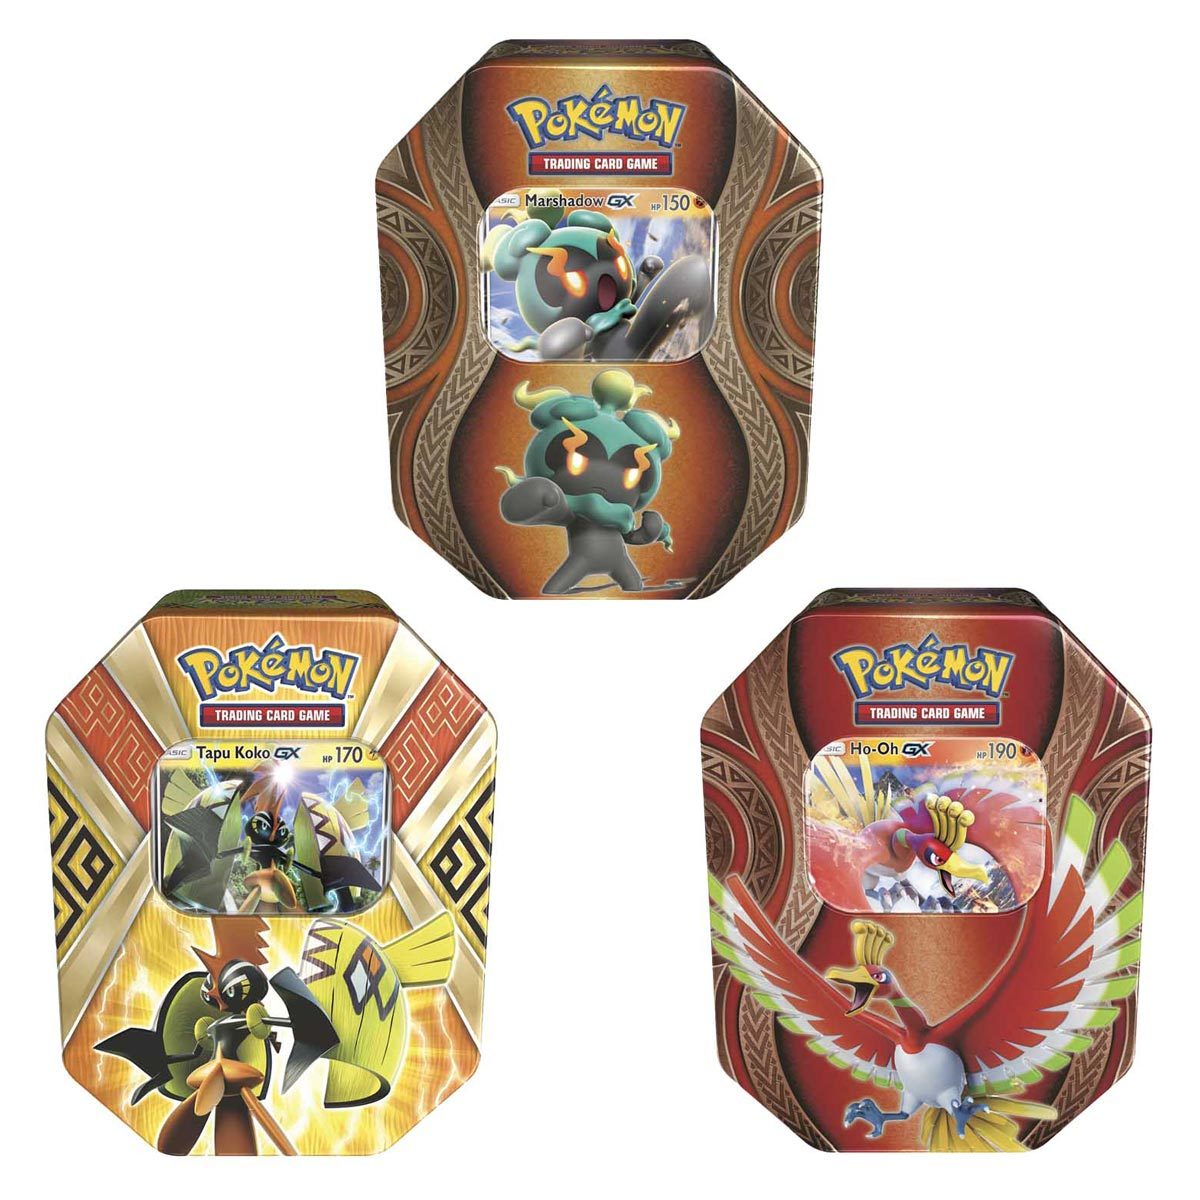 Pokemon Tin Assortment Collectors Edition - 3 Pack (6+ Years)